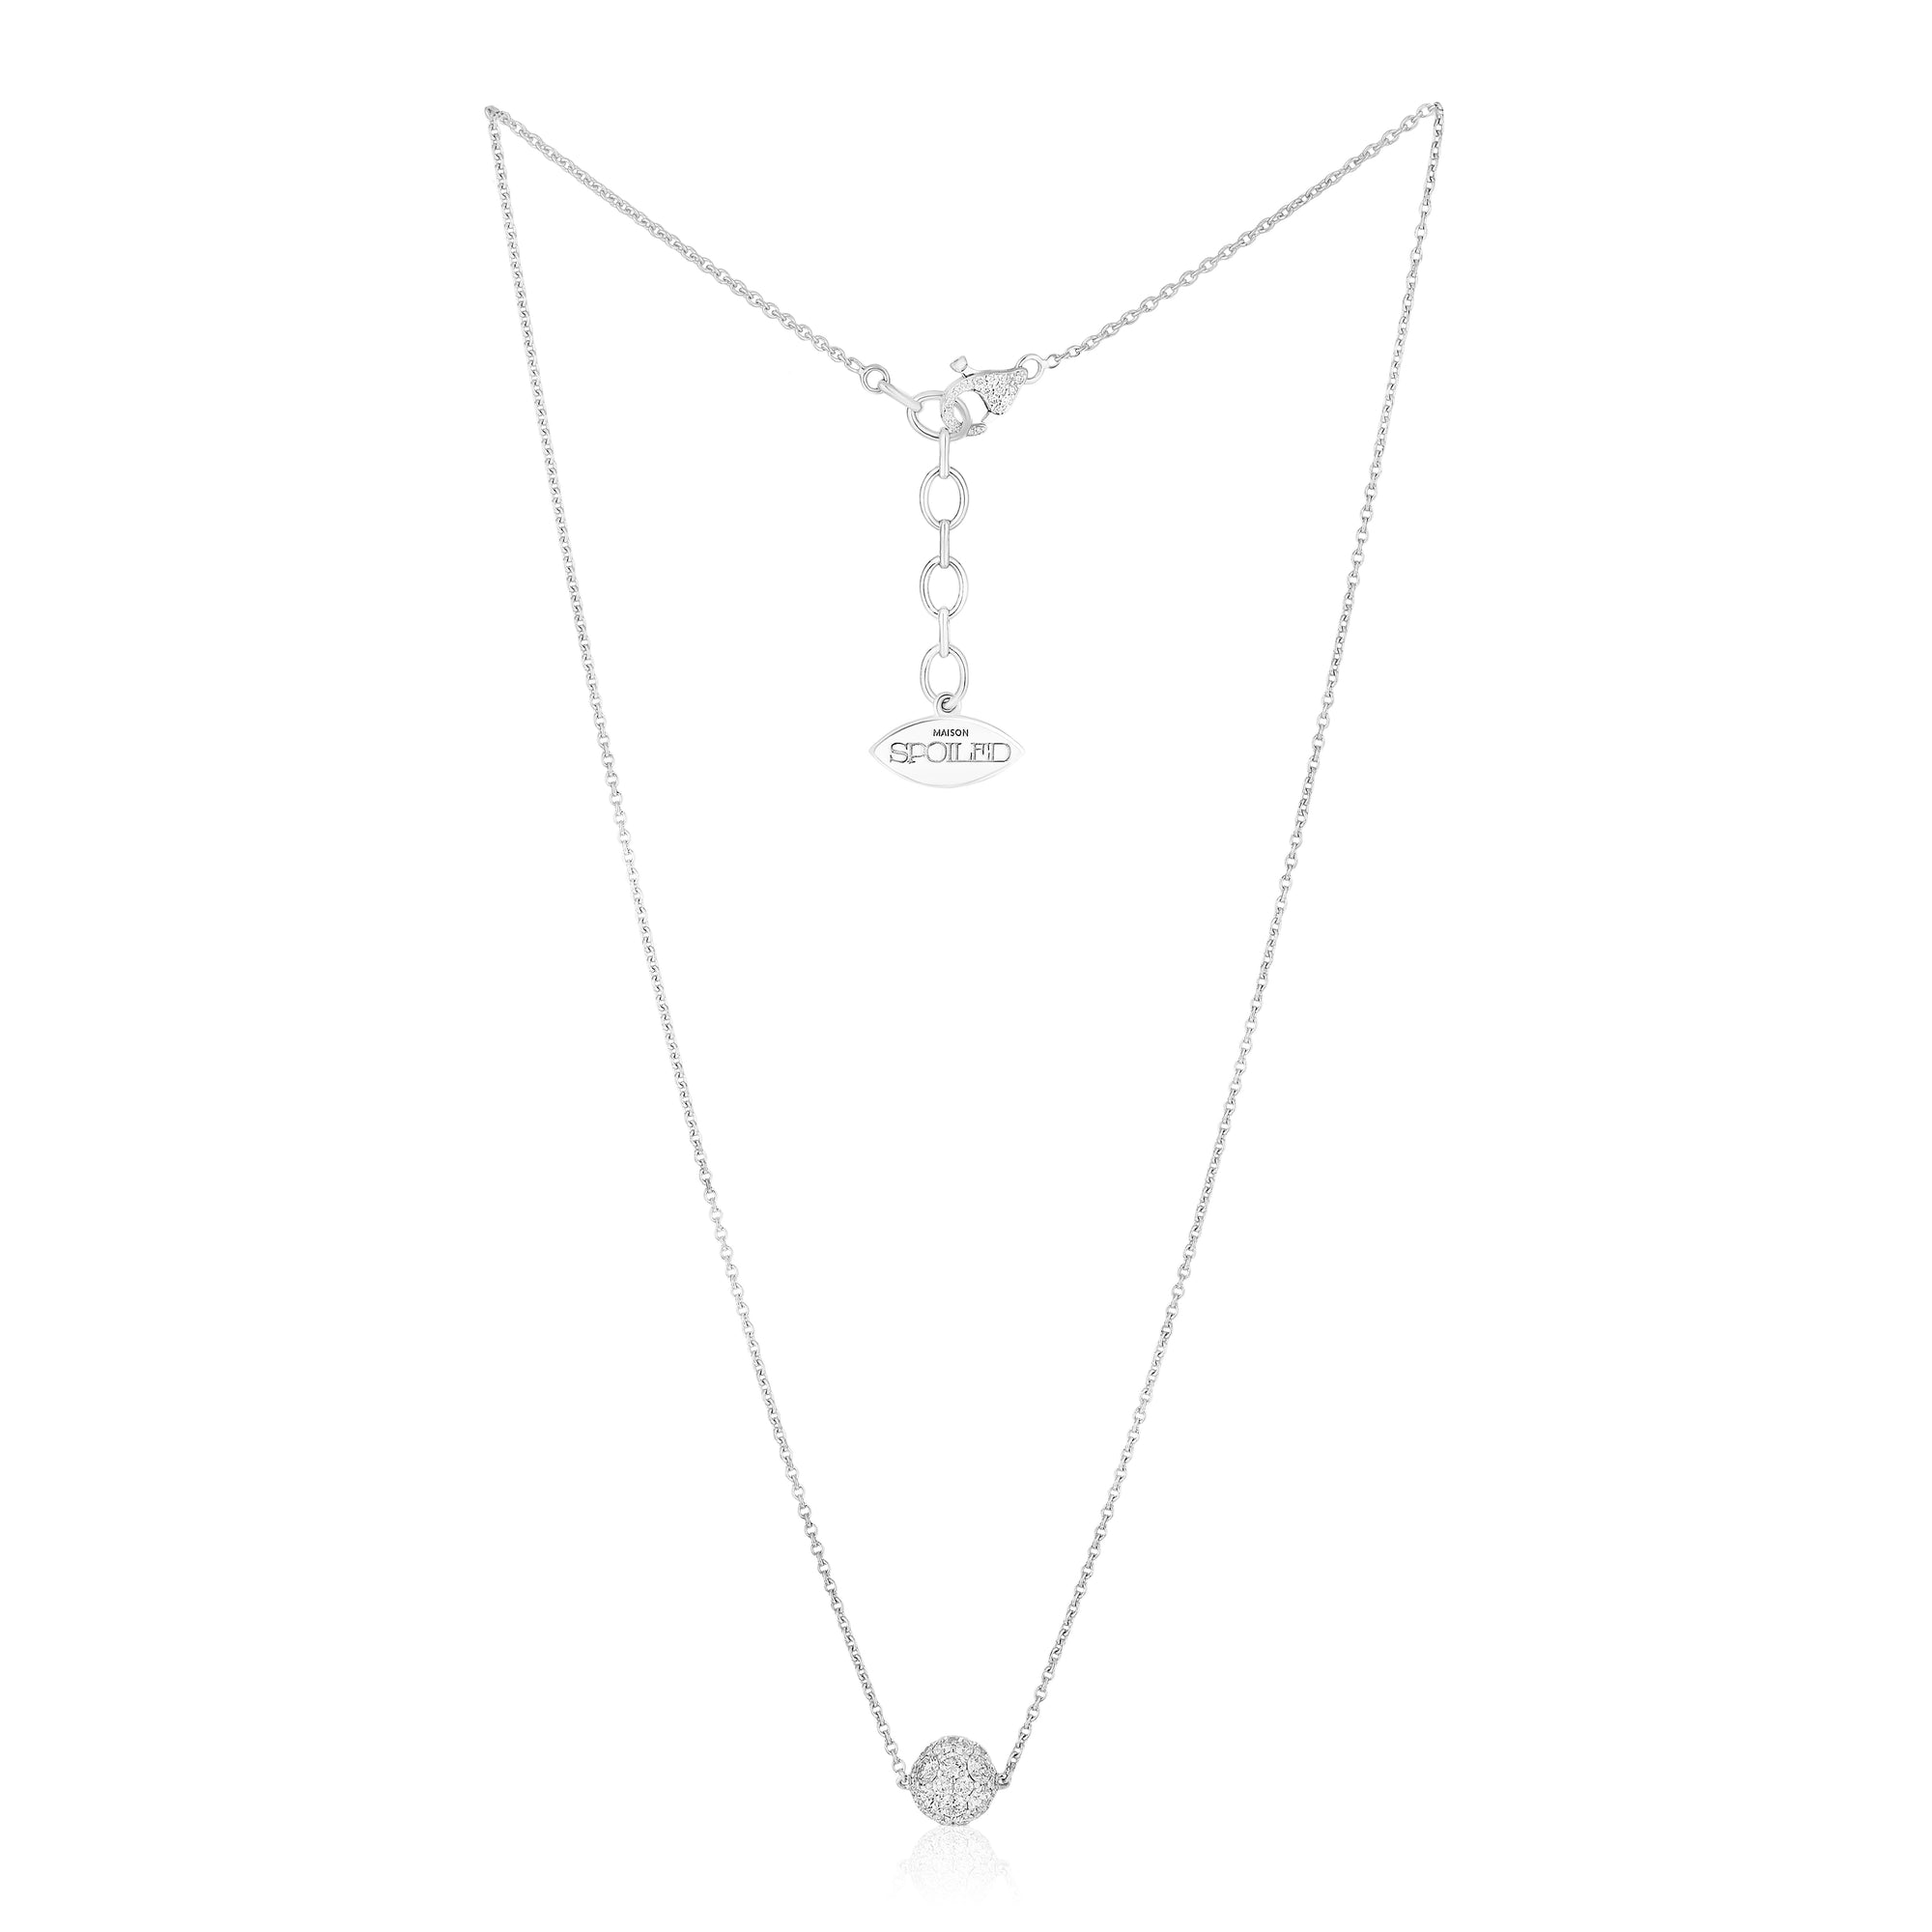 Celestial Single Charm Pendant with Standard Chain